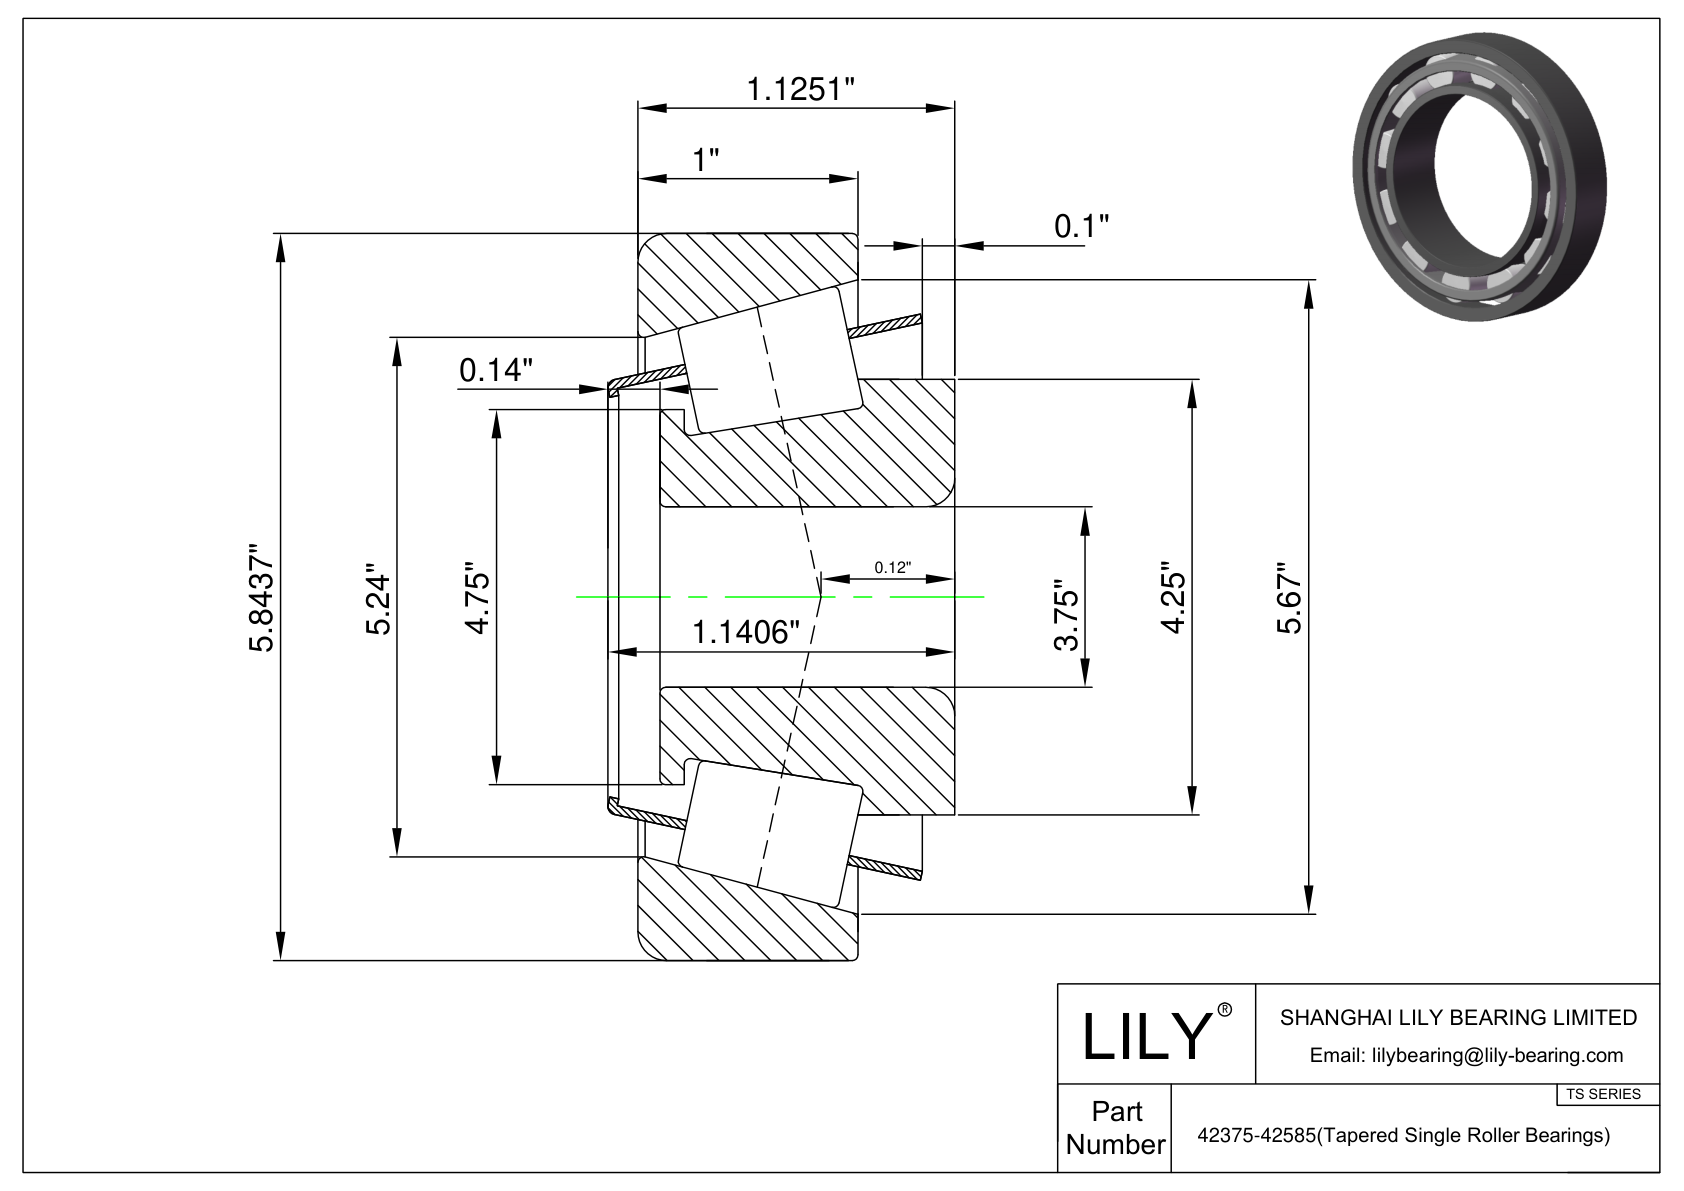 42375-42585 TS (Tapered Single Roller Bearings) (Imperial) cad drawing